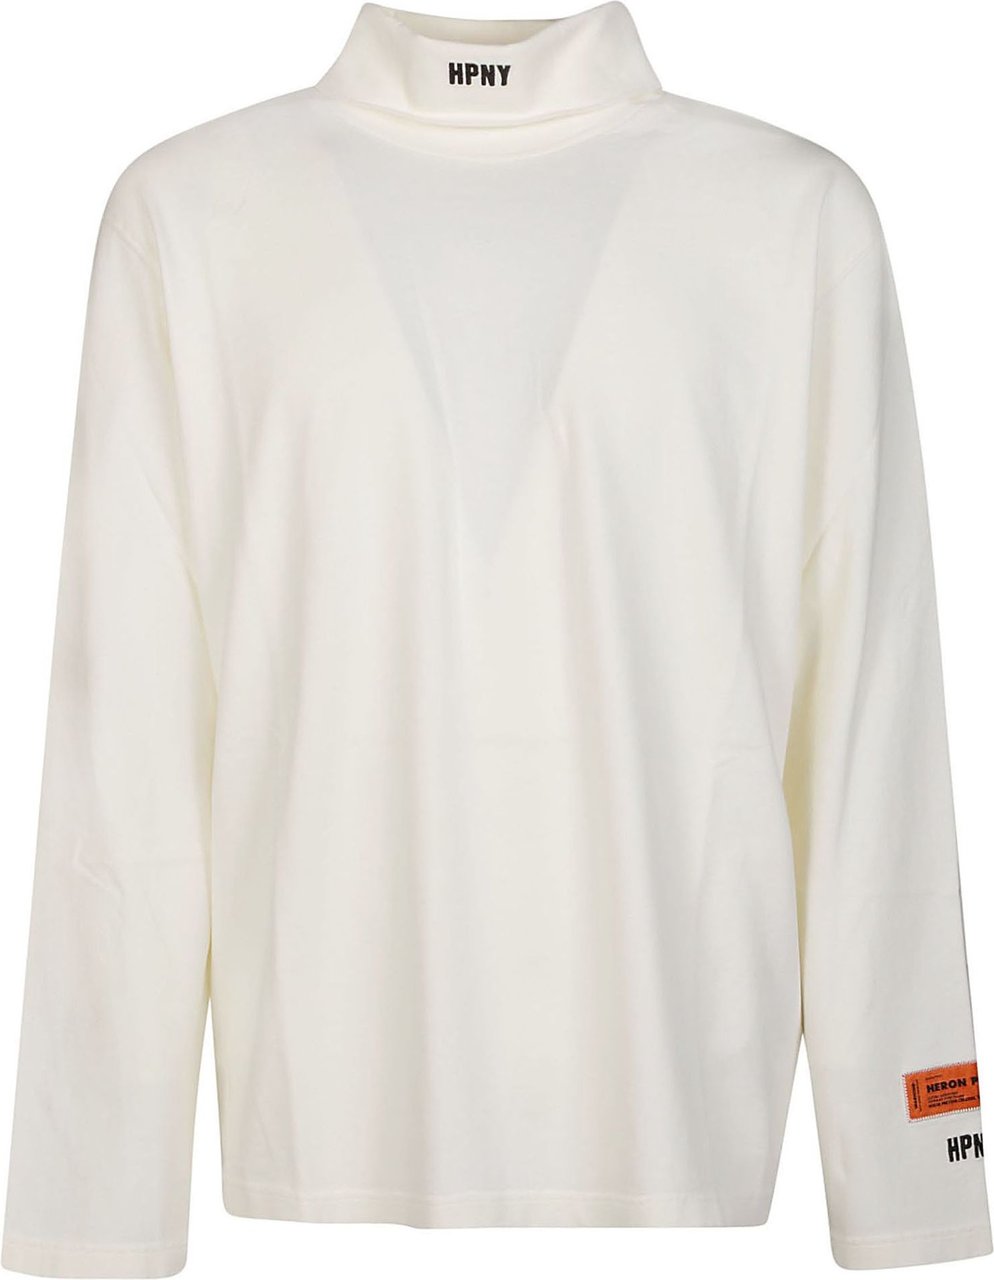 Heron Preston Hpny Embroidery Roll Neck Long Sleeve T-shirt White Wit